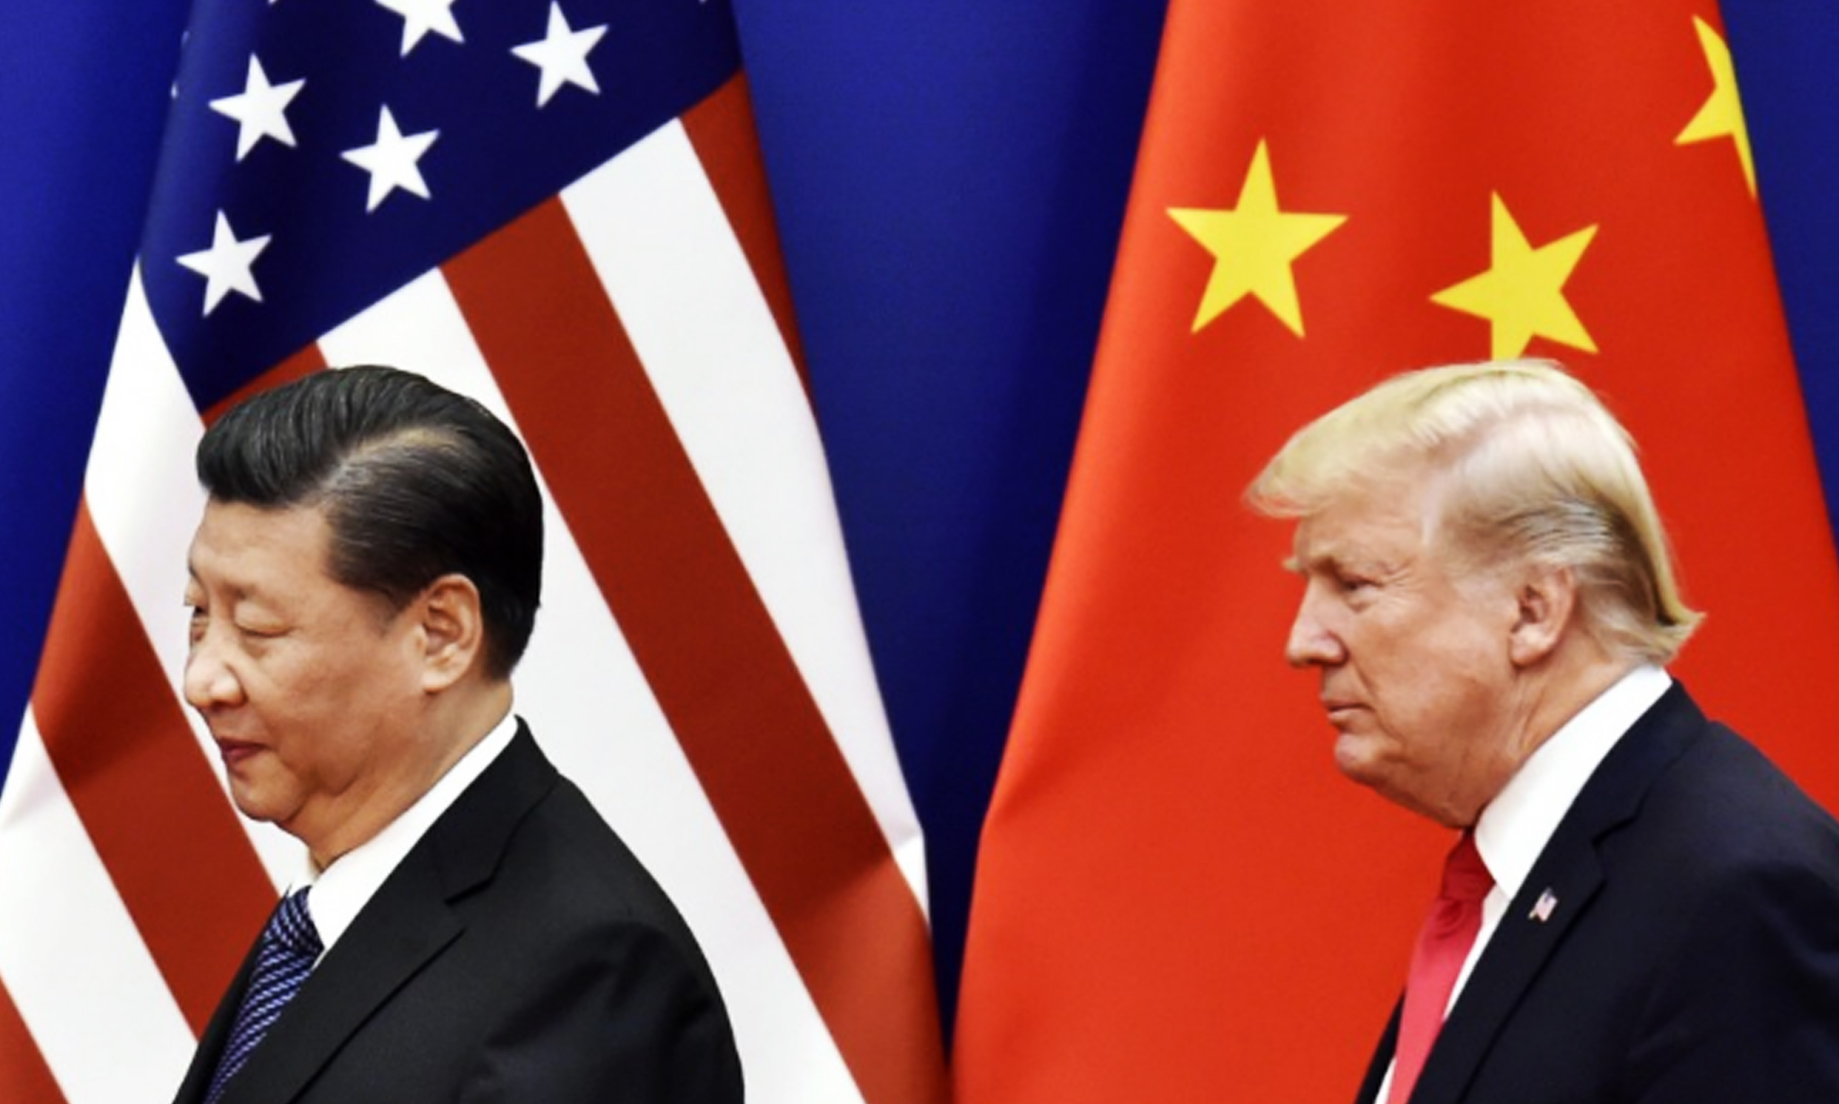 US offers delay in tariff hike, responding to Chinese gesture